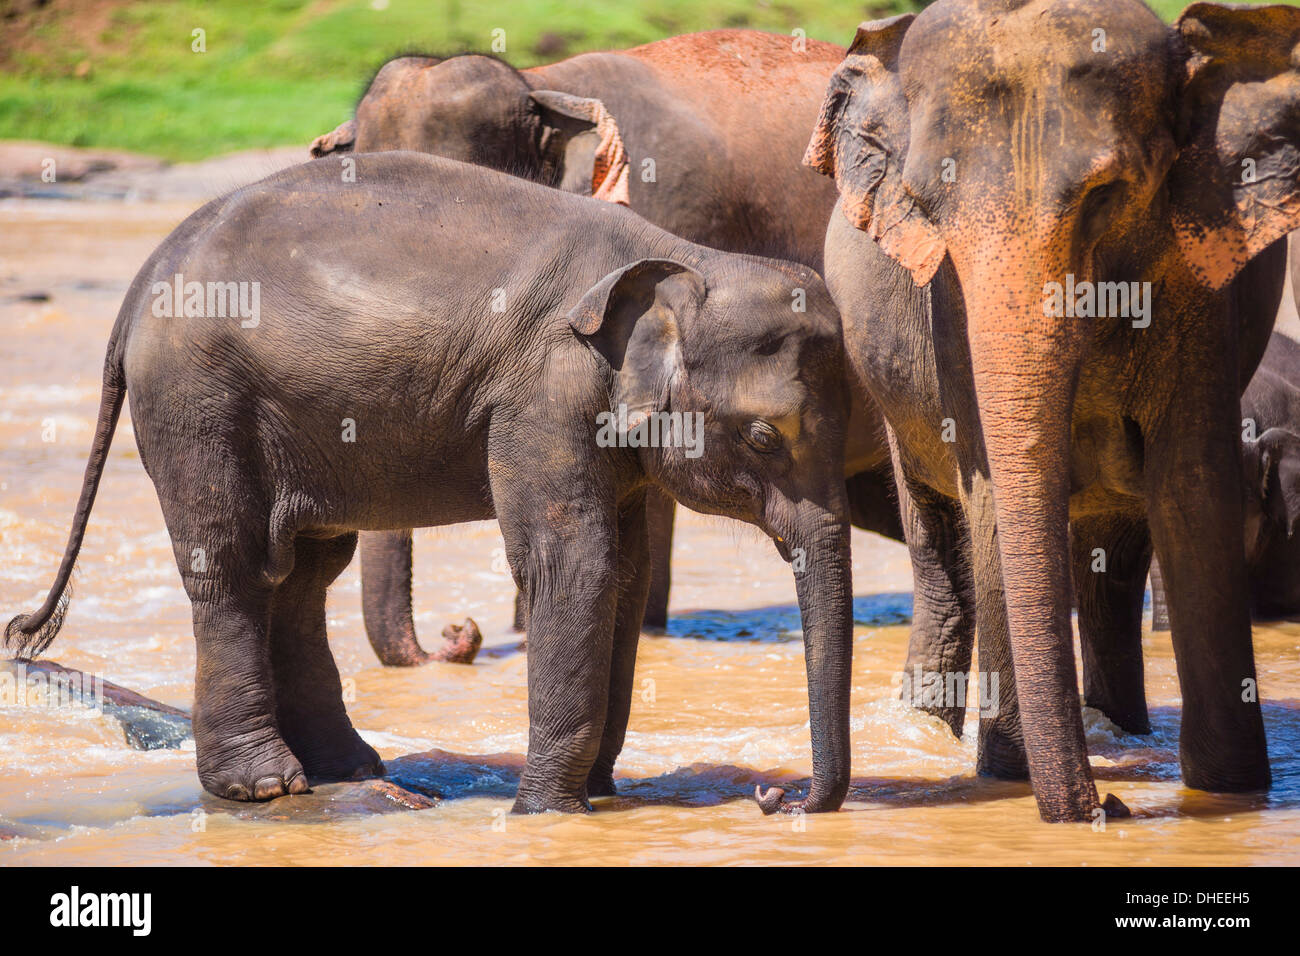 Mother and baby elephant in the Maha Oya River, Pinnawala Elephant Orphanage, near Kegalle in the Hill Country of Sri Lanka Stock Photo